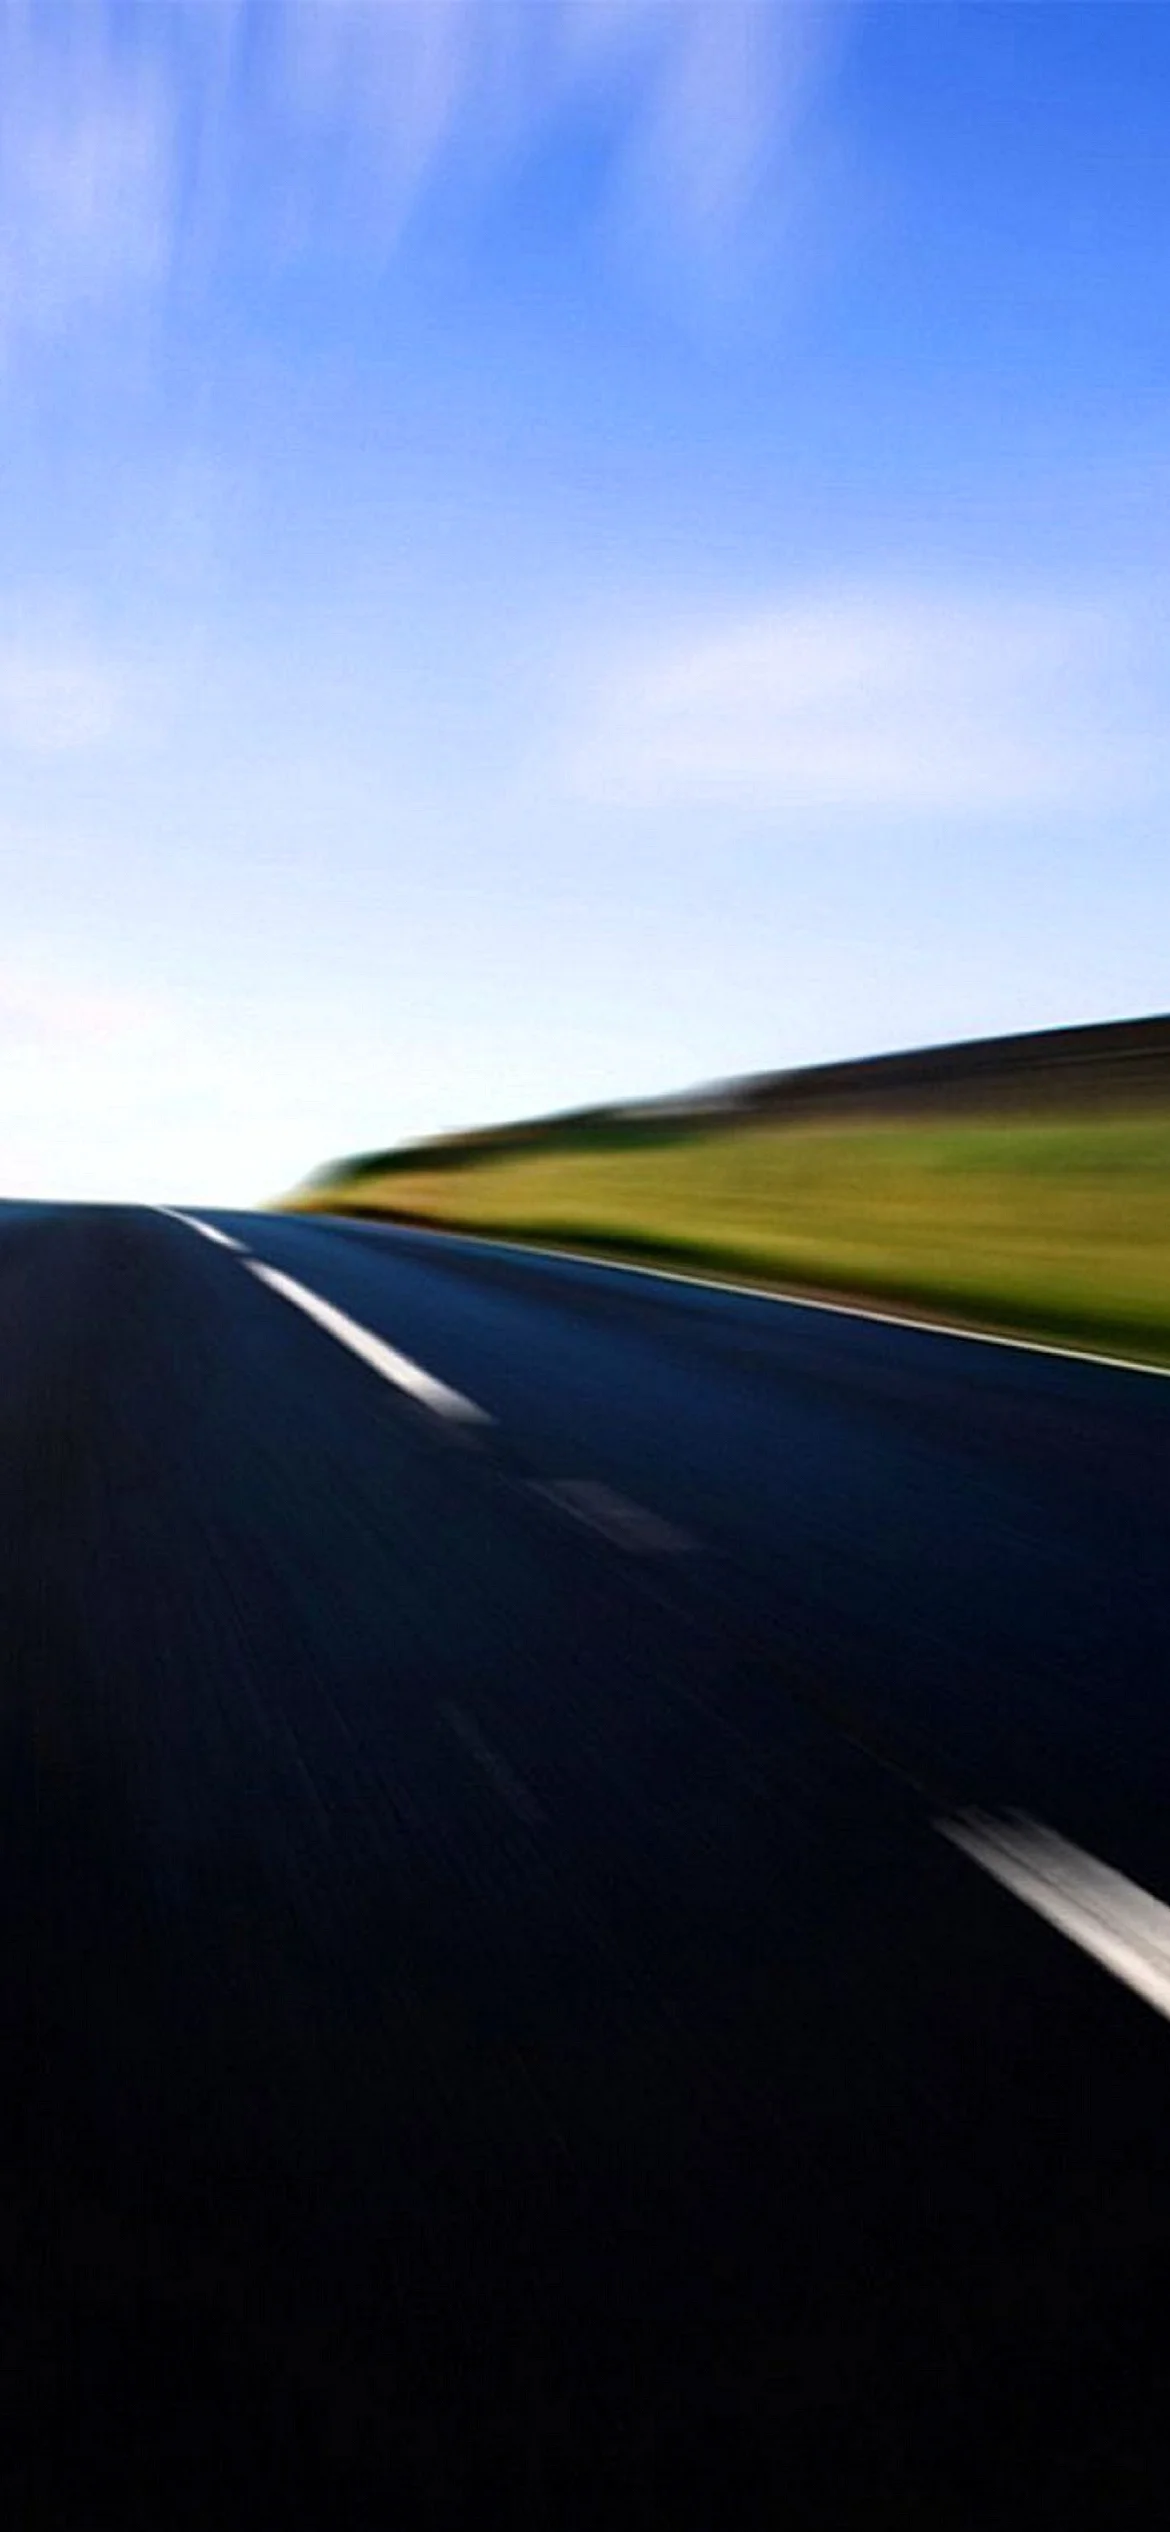 Motion Blur Road Wallpaper for iPhone 13 Pro